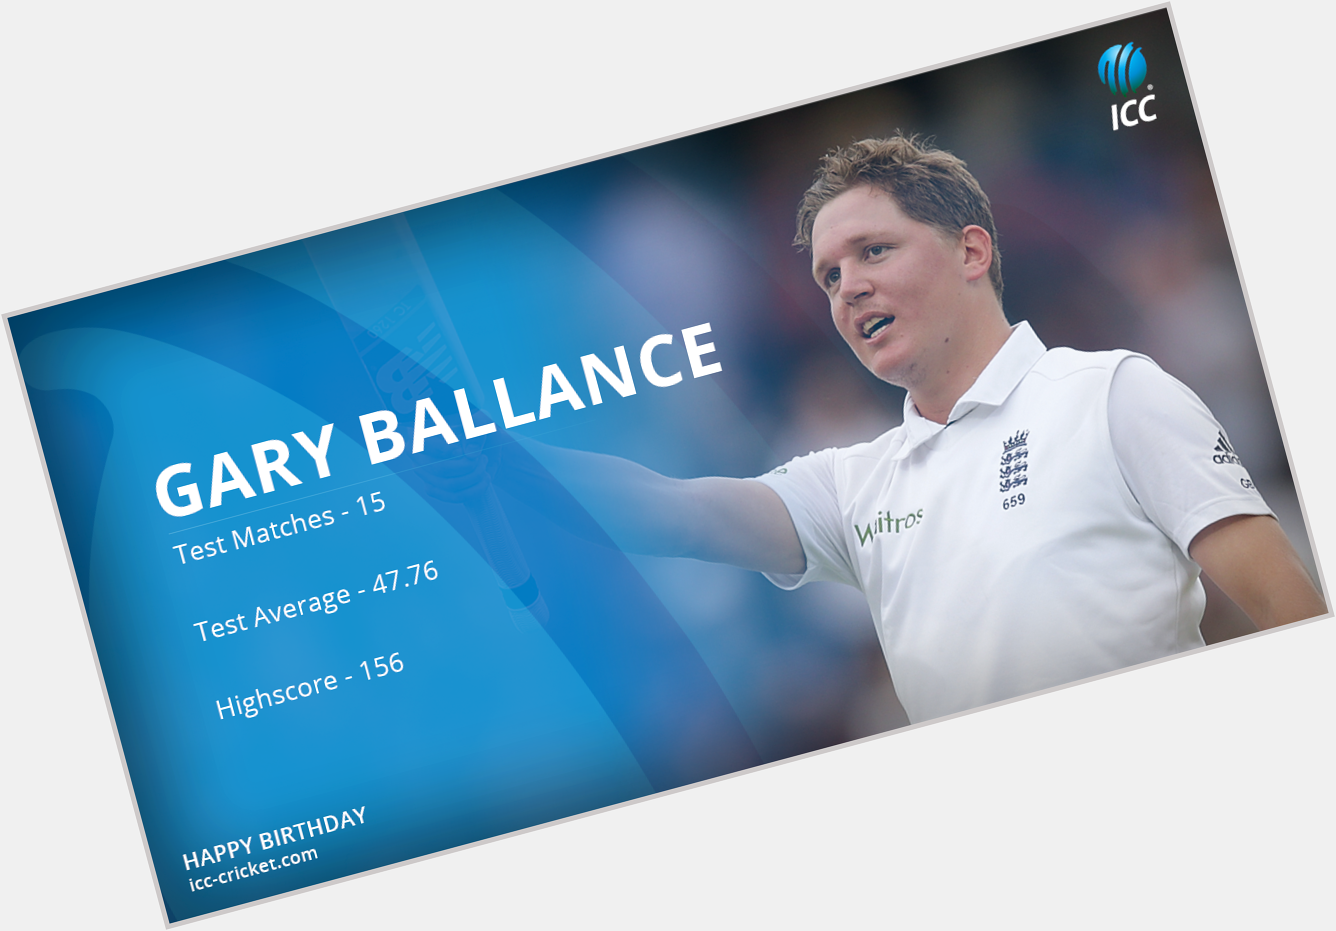 What is your favourite Gary Ballance innings for englandcricket? Happy Birthday! 